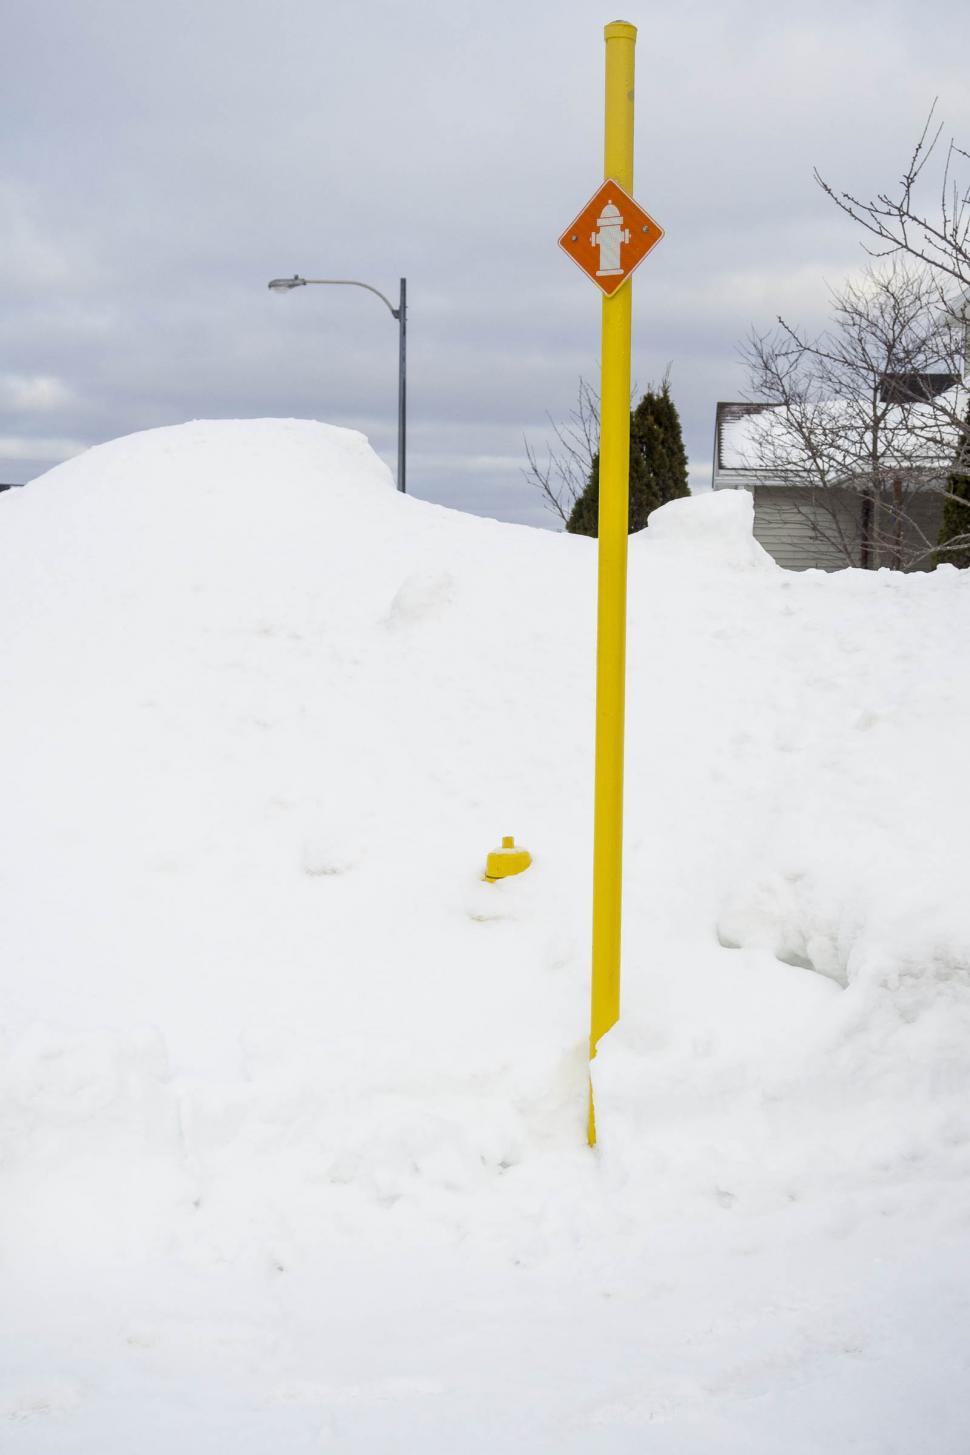 Free Image of Fire hydrant covered in snow 